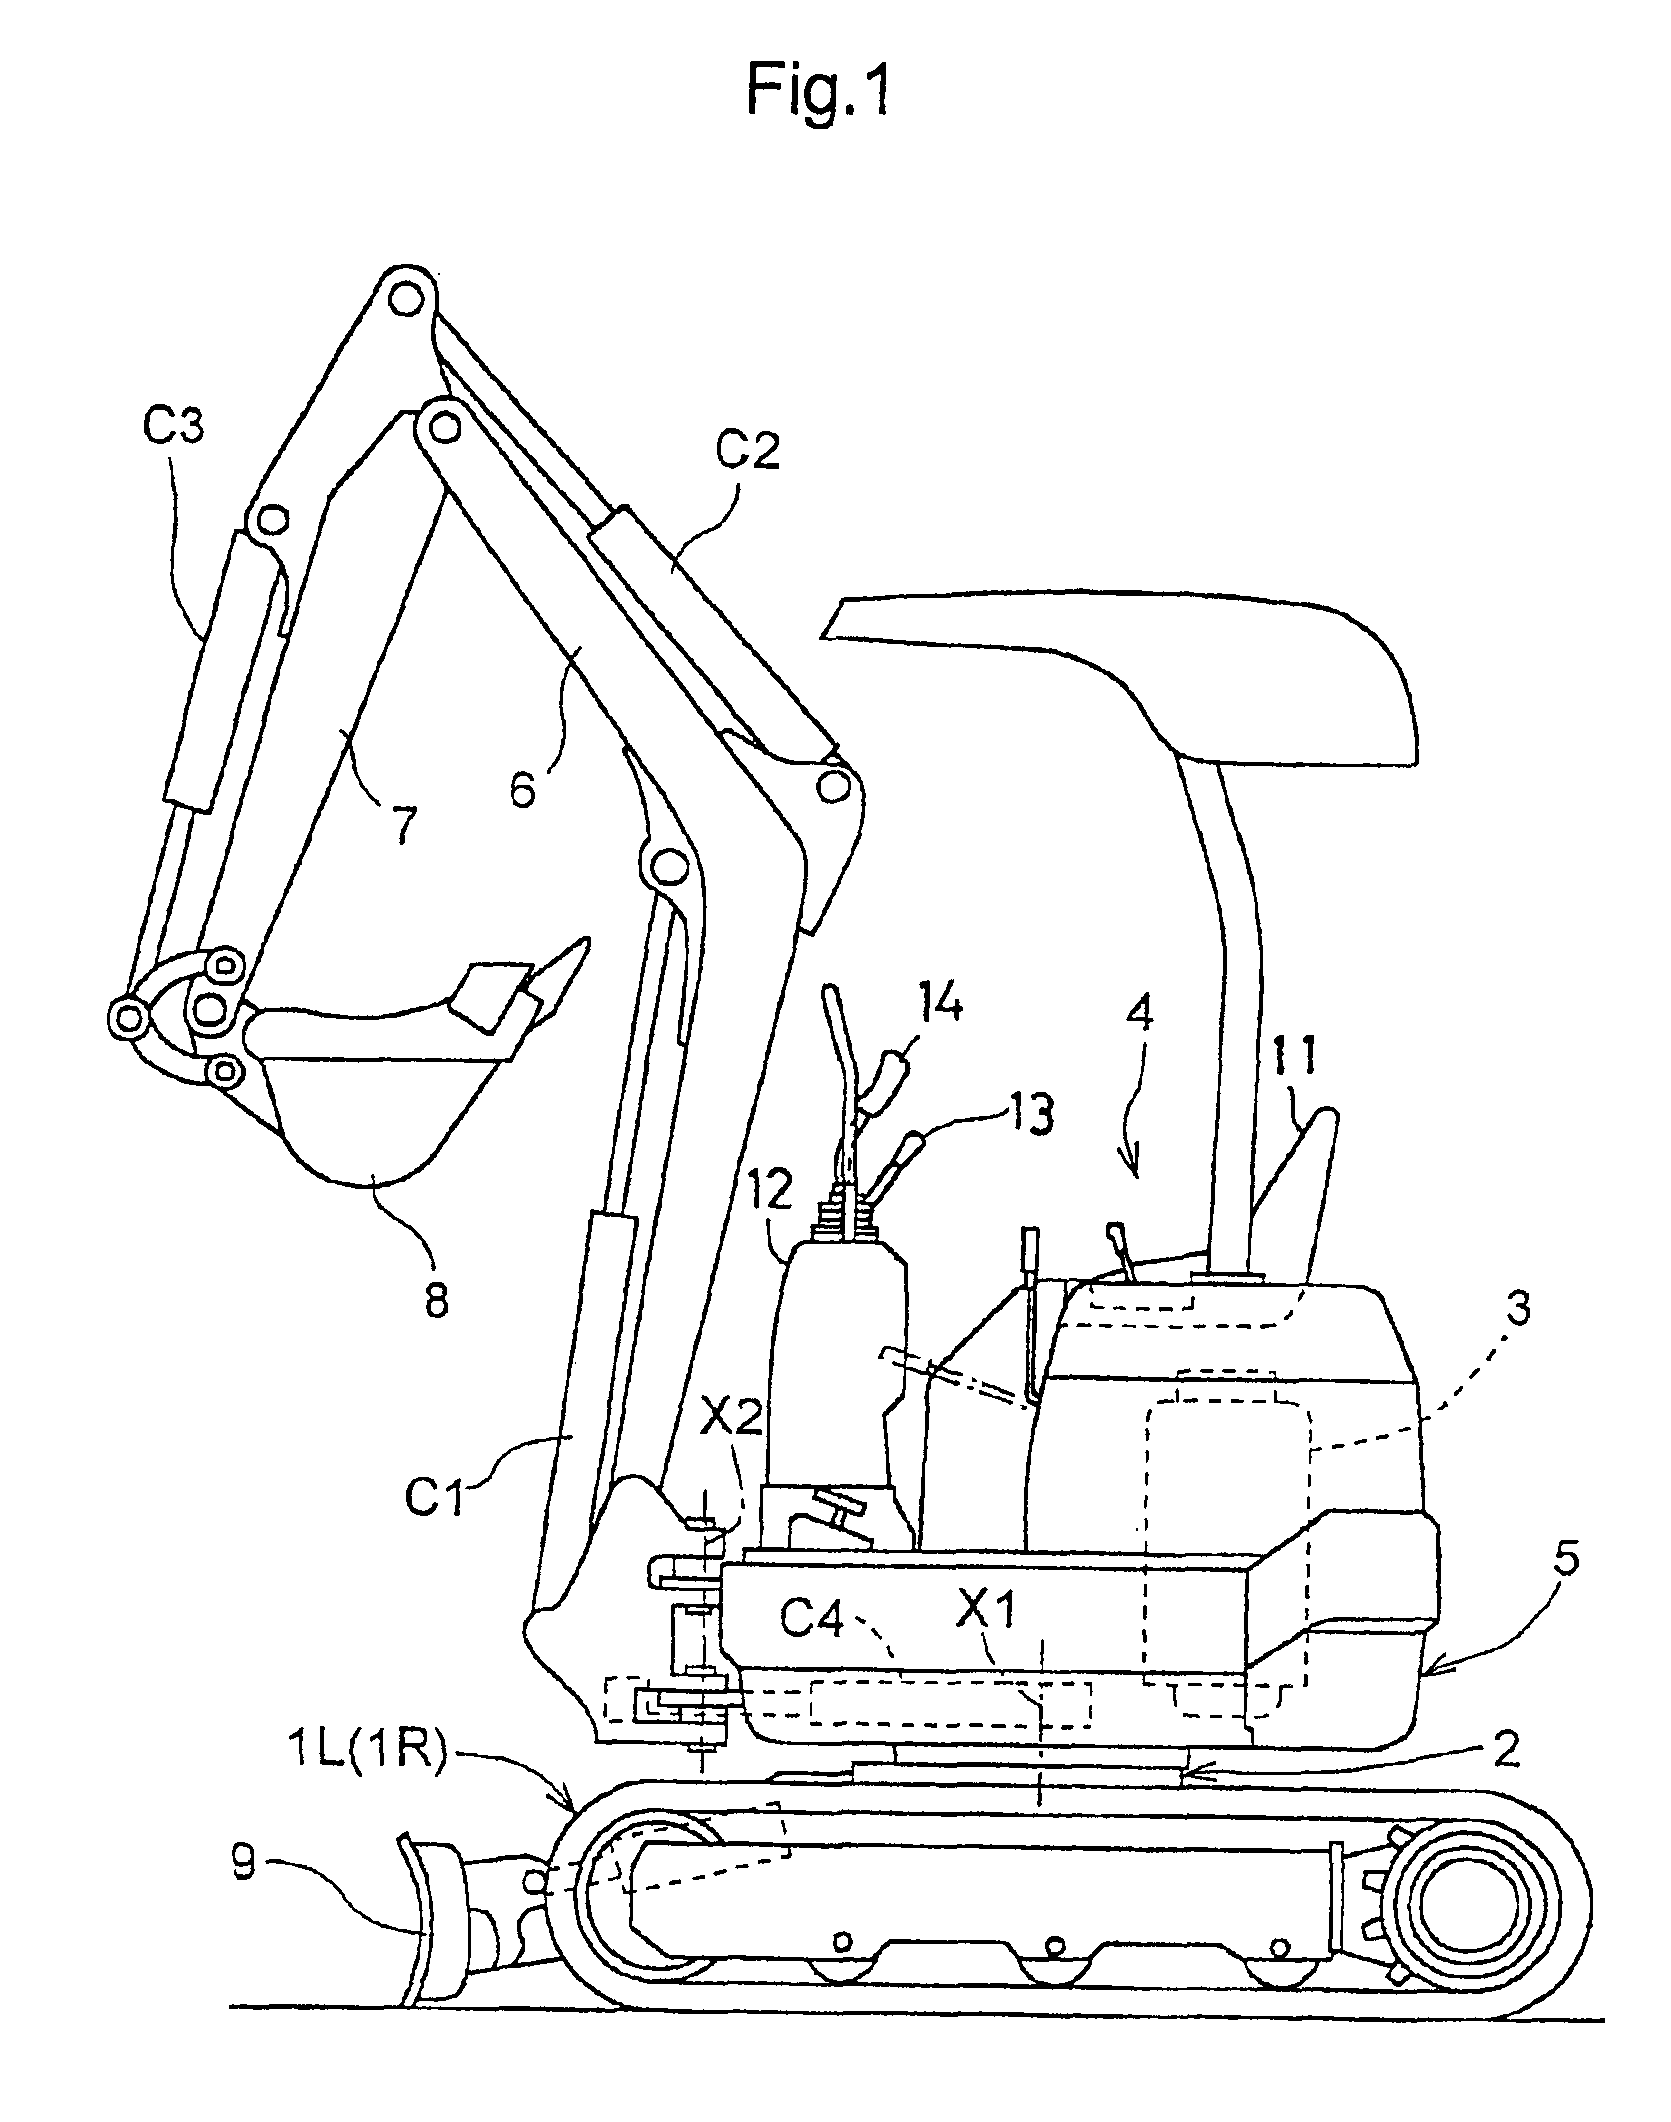 Hydraulic circuit for backhoe